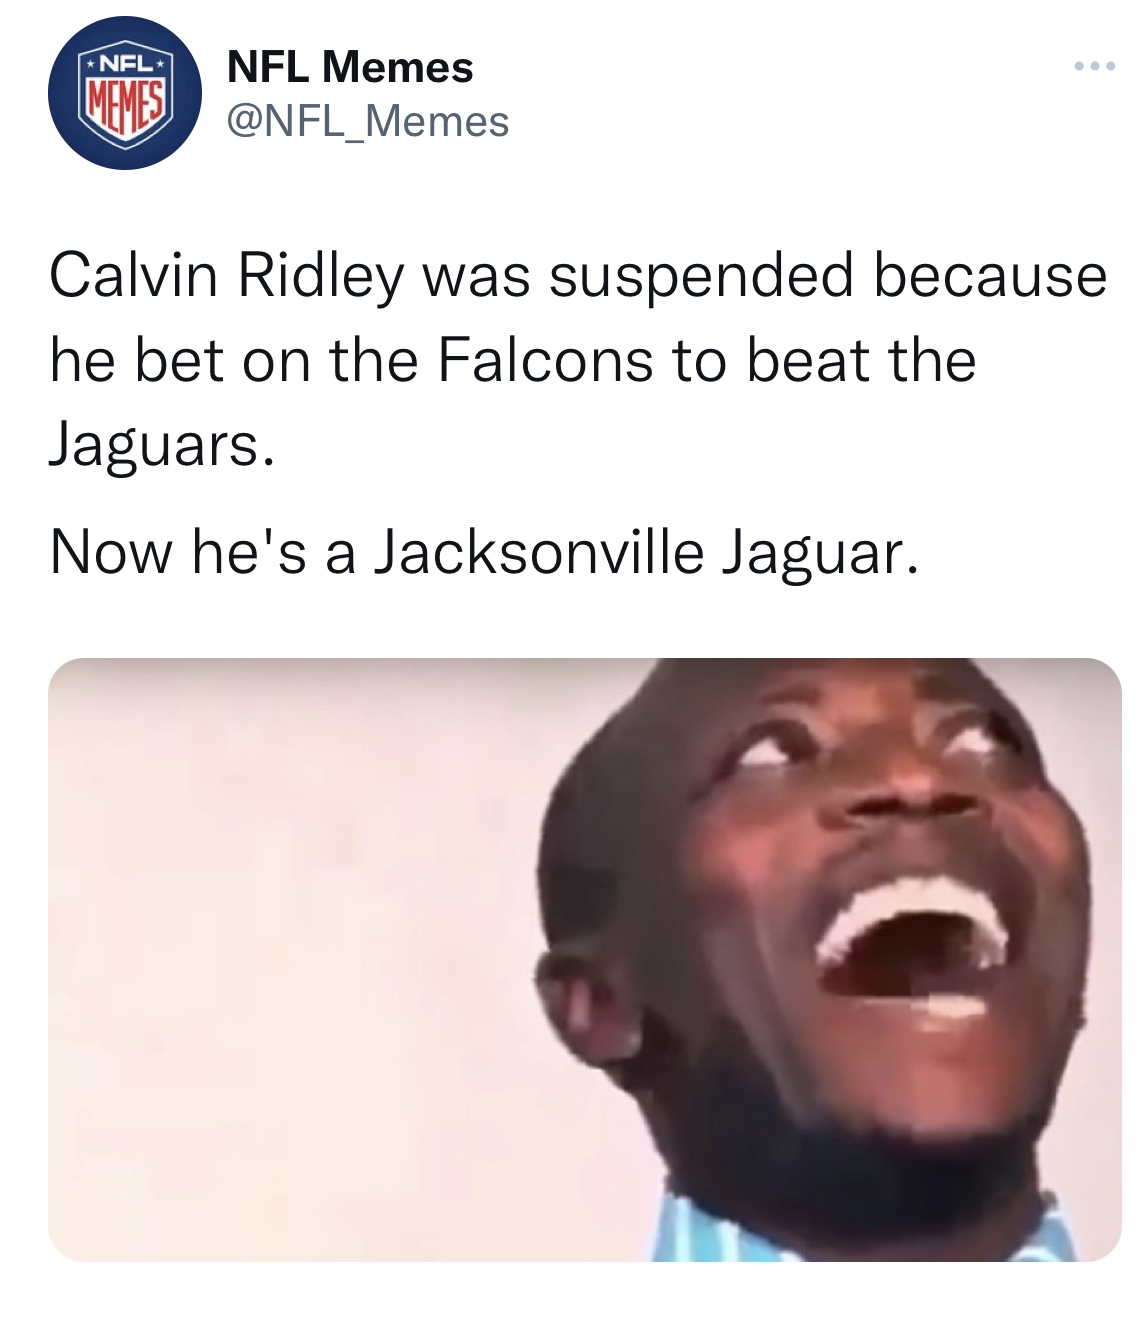 Celebs get roasted on twitter - head - Nfl Nfl Memes Memes Calvin Ridley was suspended because he bet on the Falcons to beat the Jaguars. Now he's a Jacksonville Jaguar.